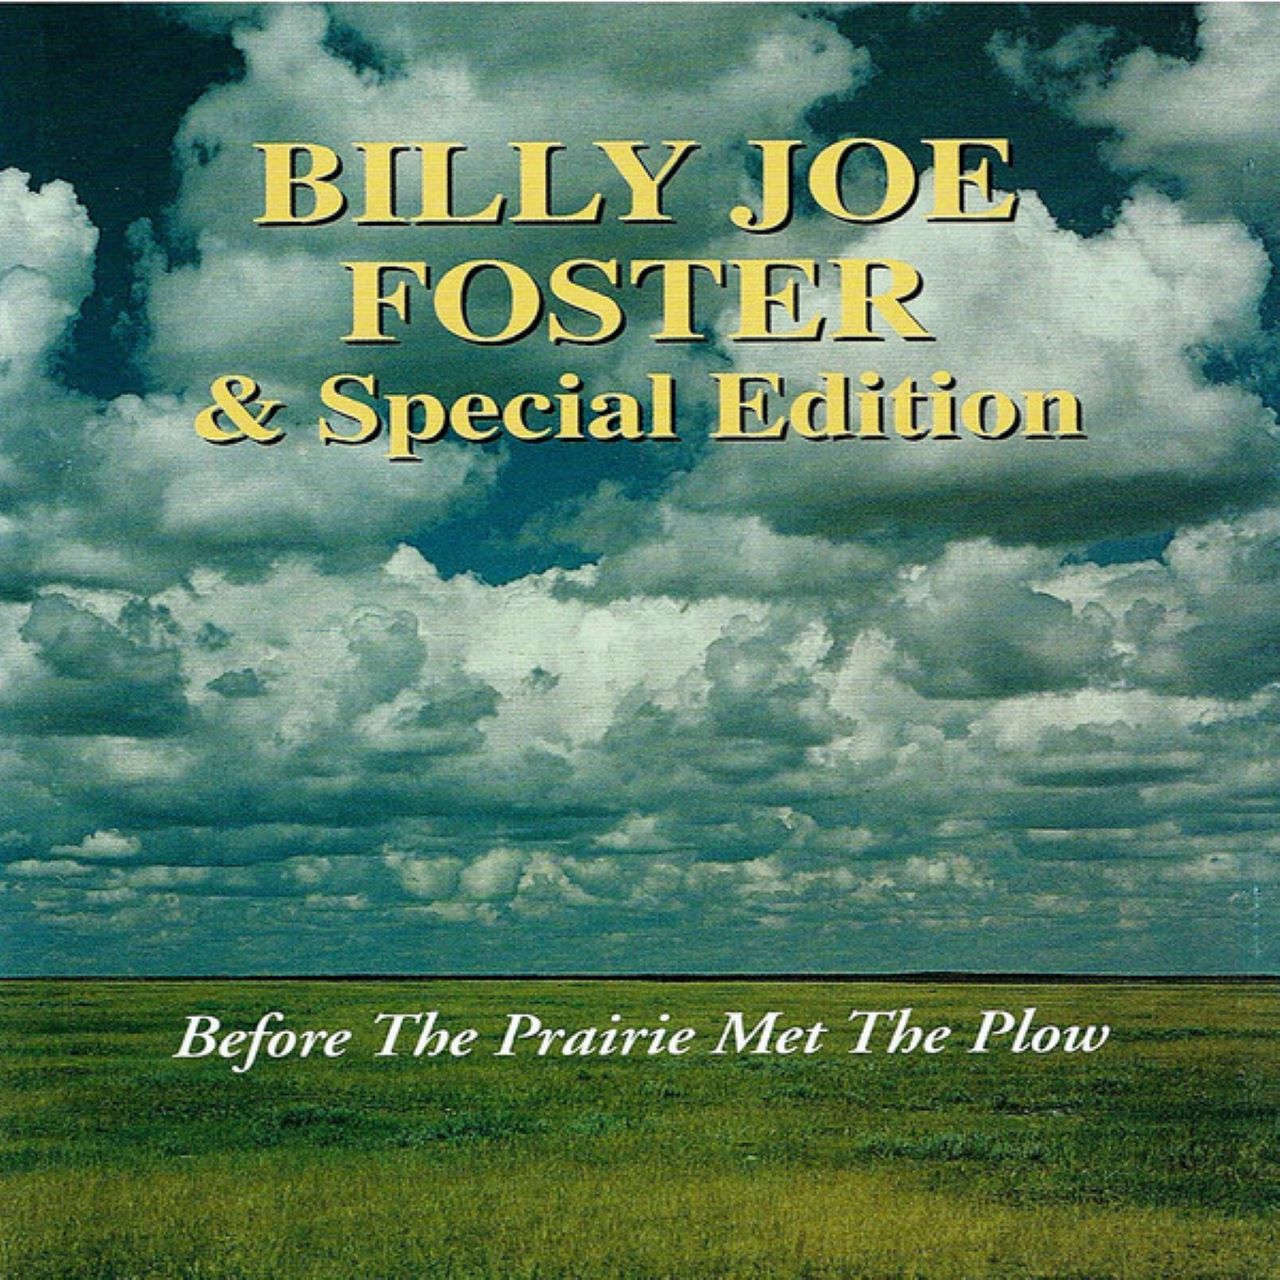 Billy Joe Foster & Special Edition - Before The Prairie Met The Plow cover album